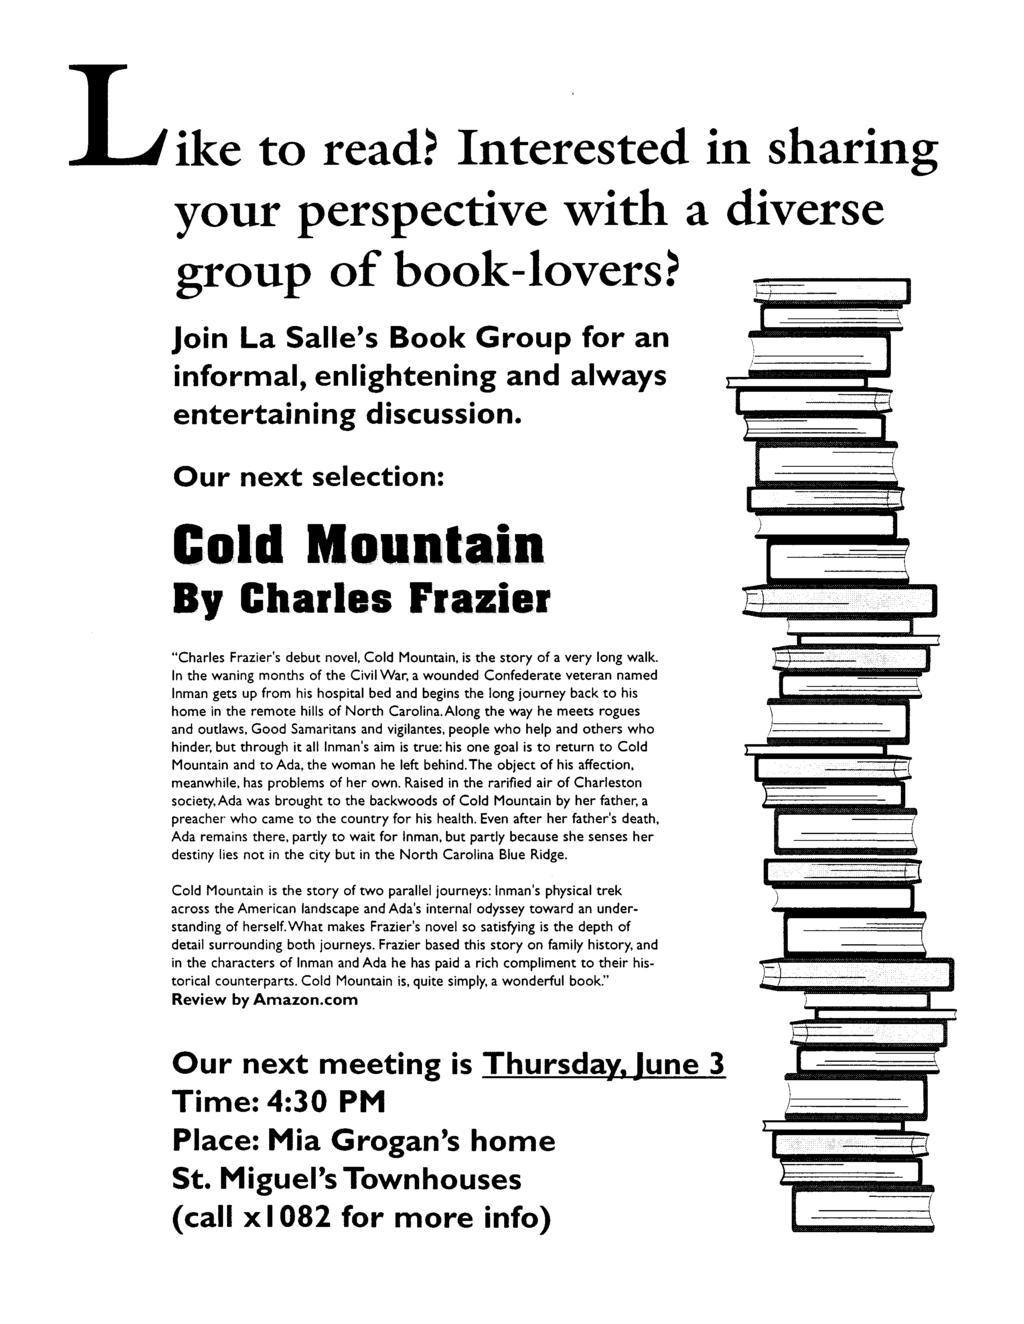 ike to read? Interested in sharing your perspective with a diverse group o f book-lovers? Join La Salle s Book Group for an informal, enlightening and always entertaining discussion.